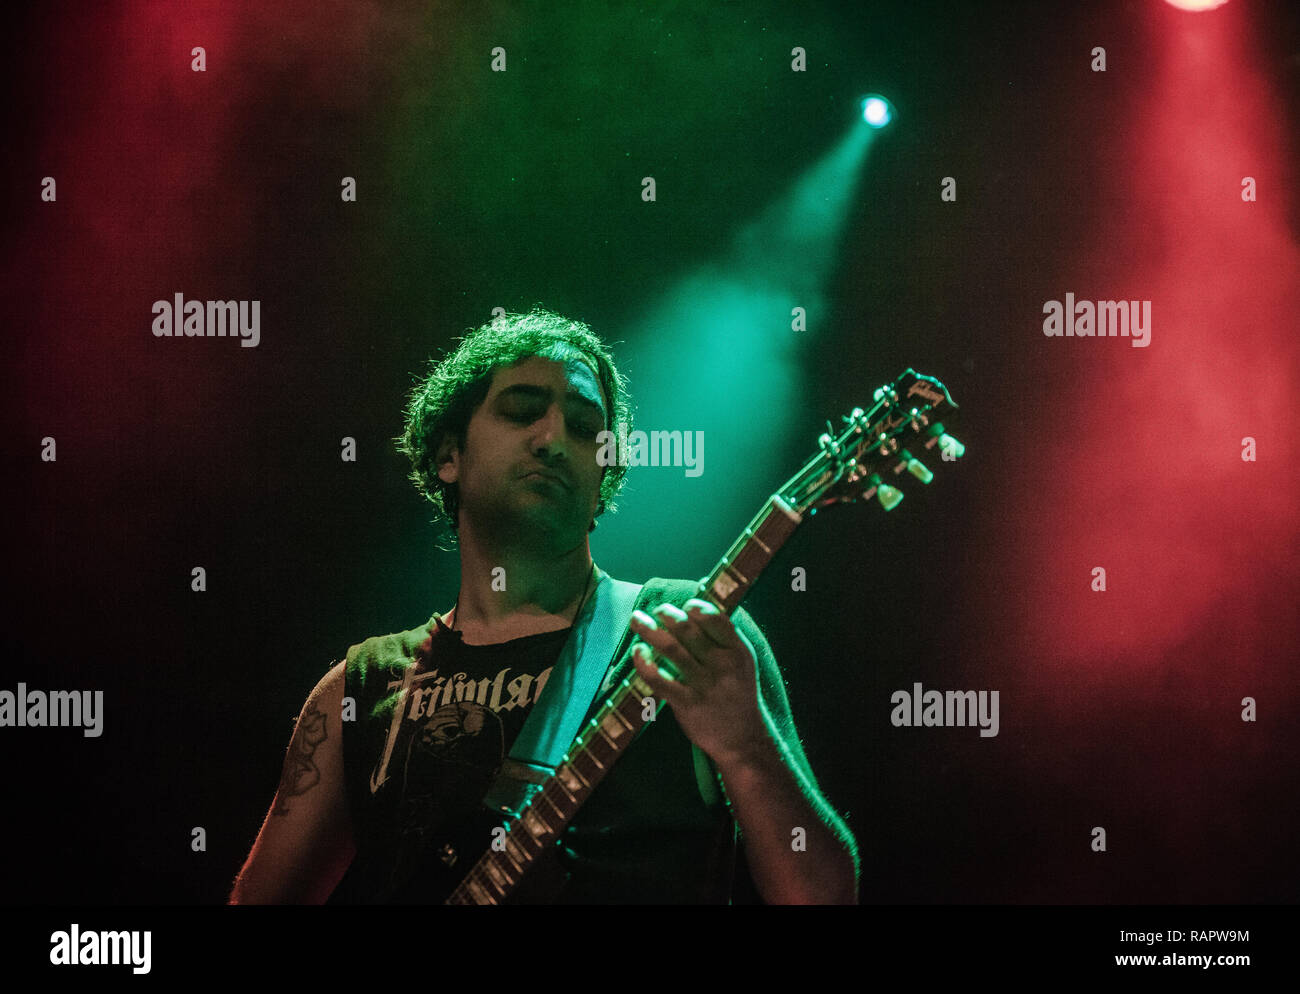 The American black metal band Deafheaven performs a live concert at Amager Bio in Copenhagen. Here guitarist Shiv Mehra is seen live on stage. Denmark, 17/03 2016. EXCLUDING DENMARK. Stock Photo